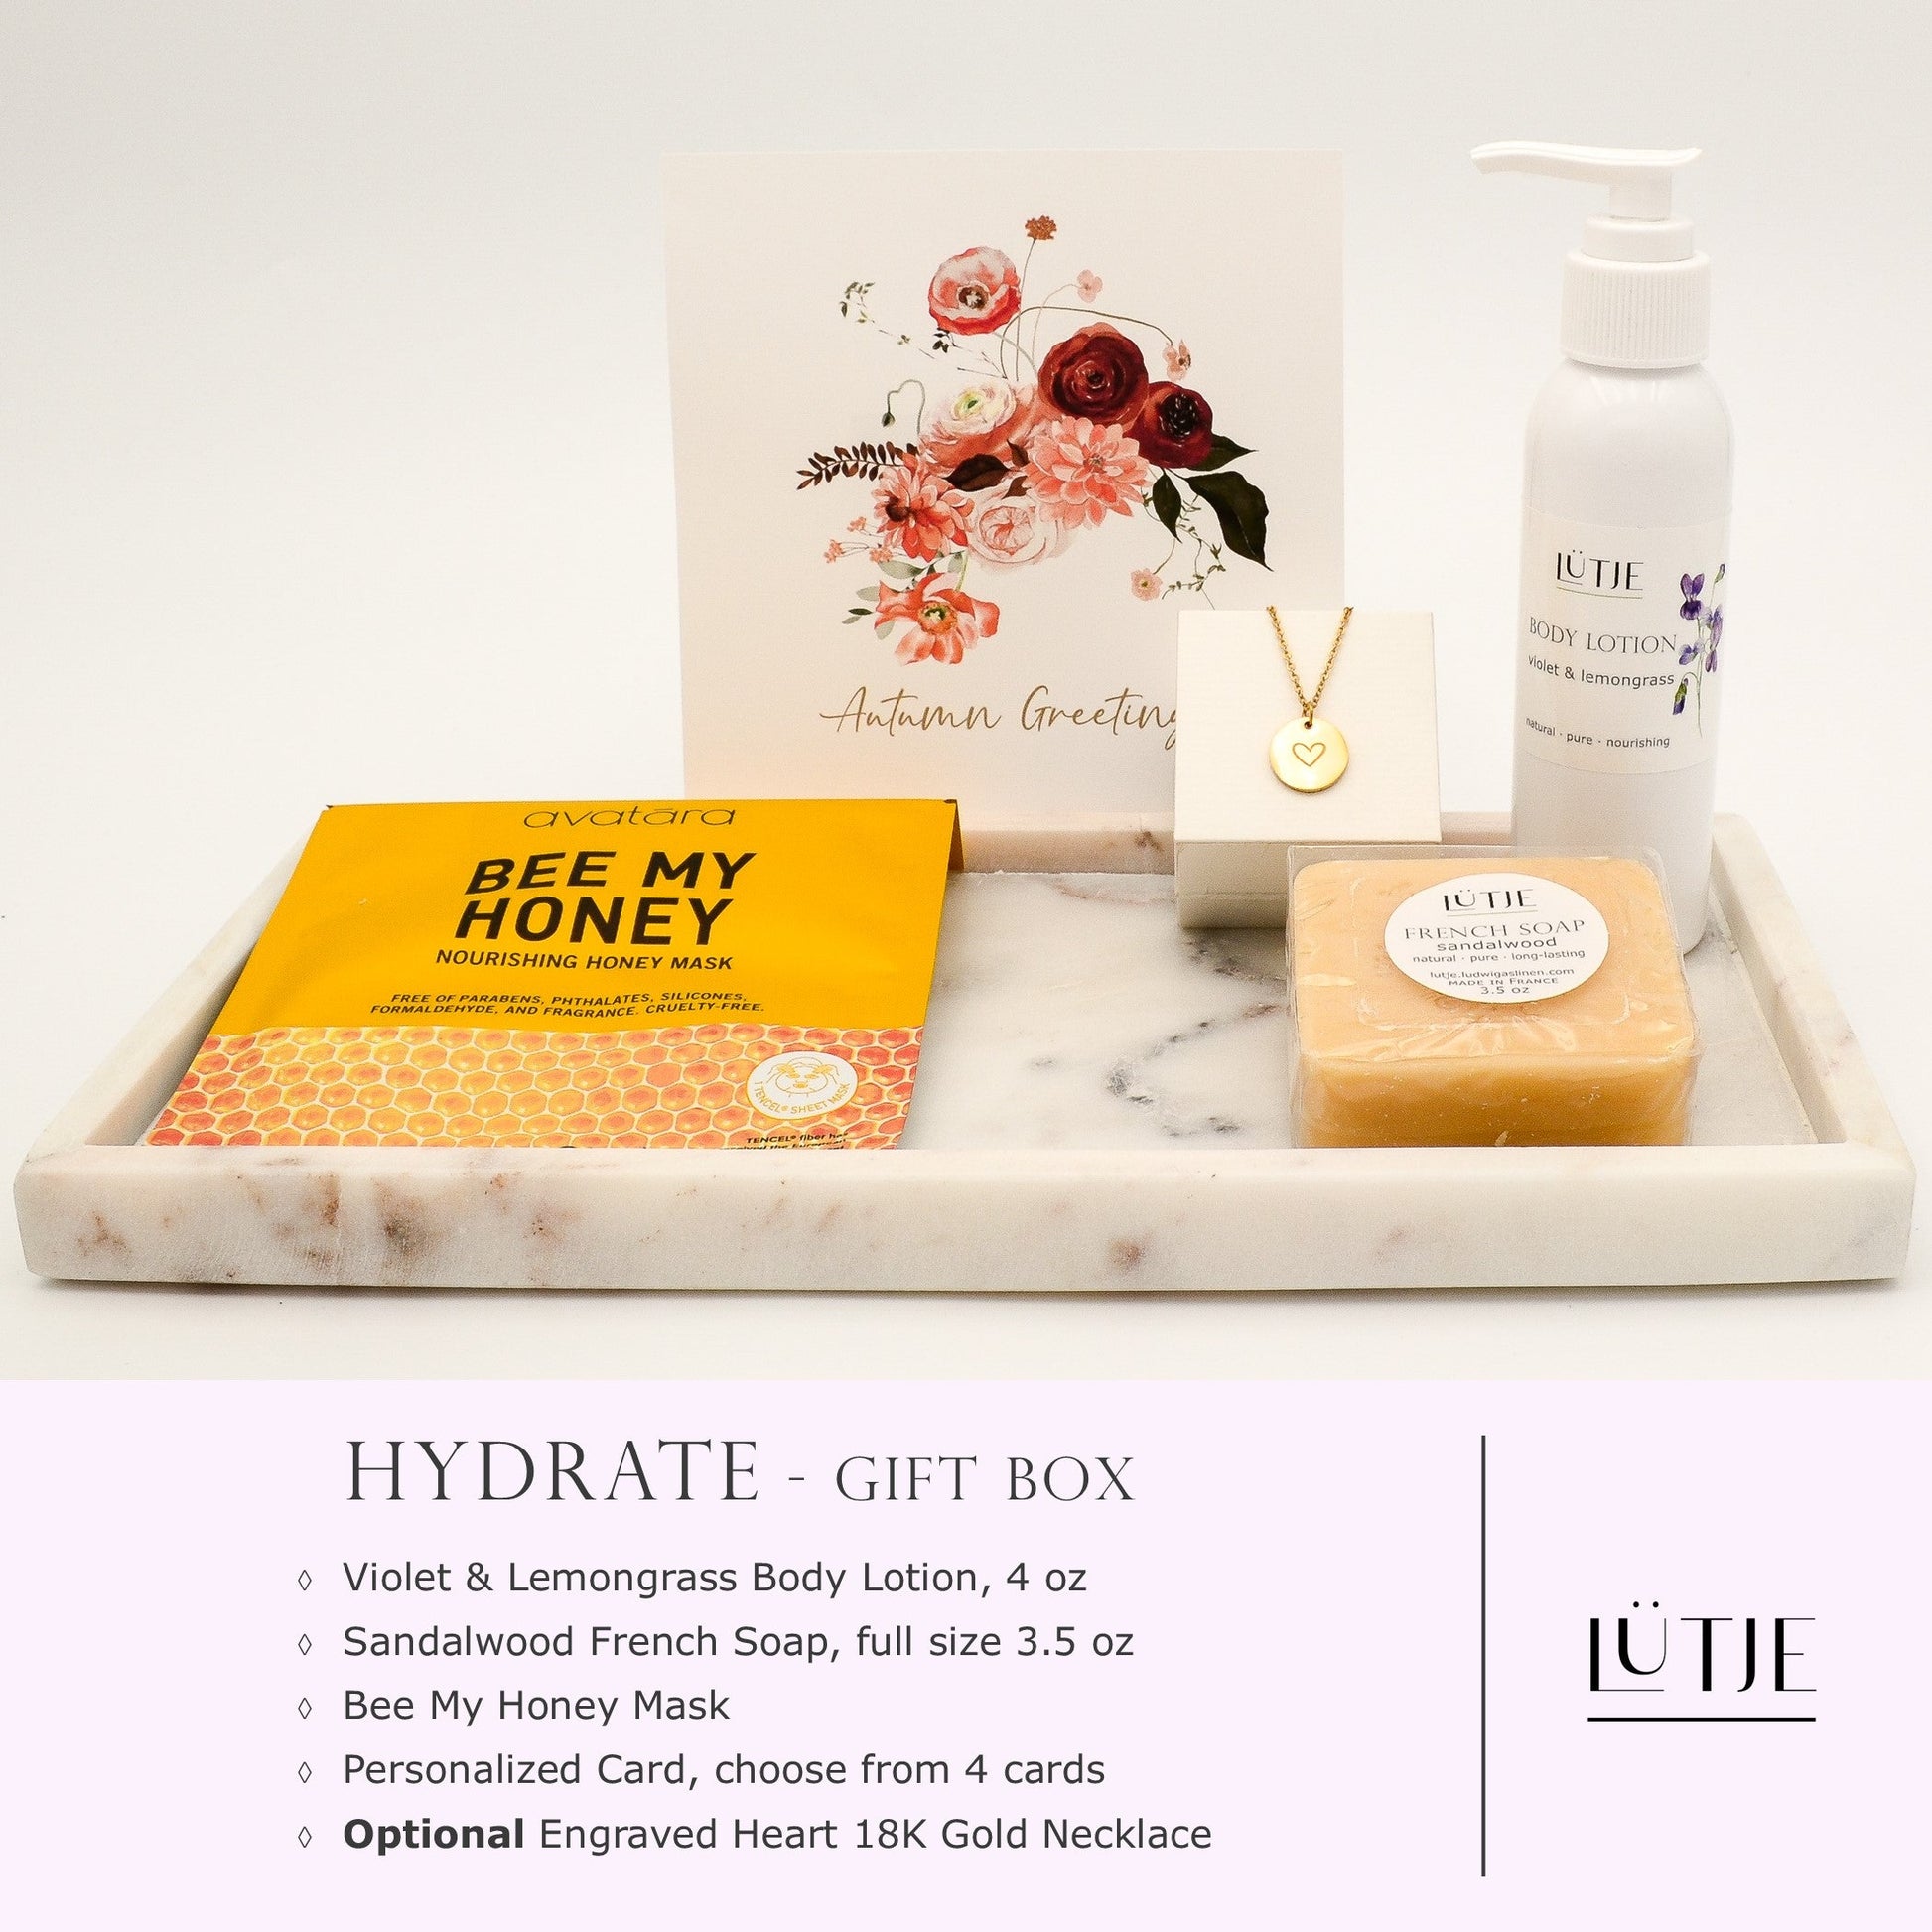 Hydrate Gift Box for women, daughter, mom, BFF, wife, sister or grandma, includes Violet & Lemongrass body lotion, French soap, hydrating face mask, and optional 18K gold-plated necklace with engraved heart.